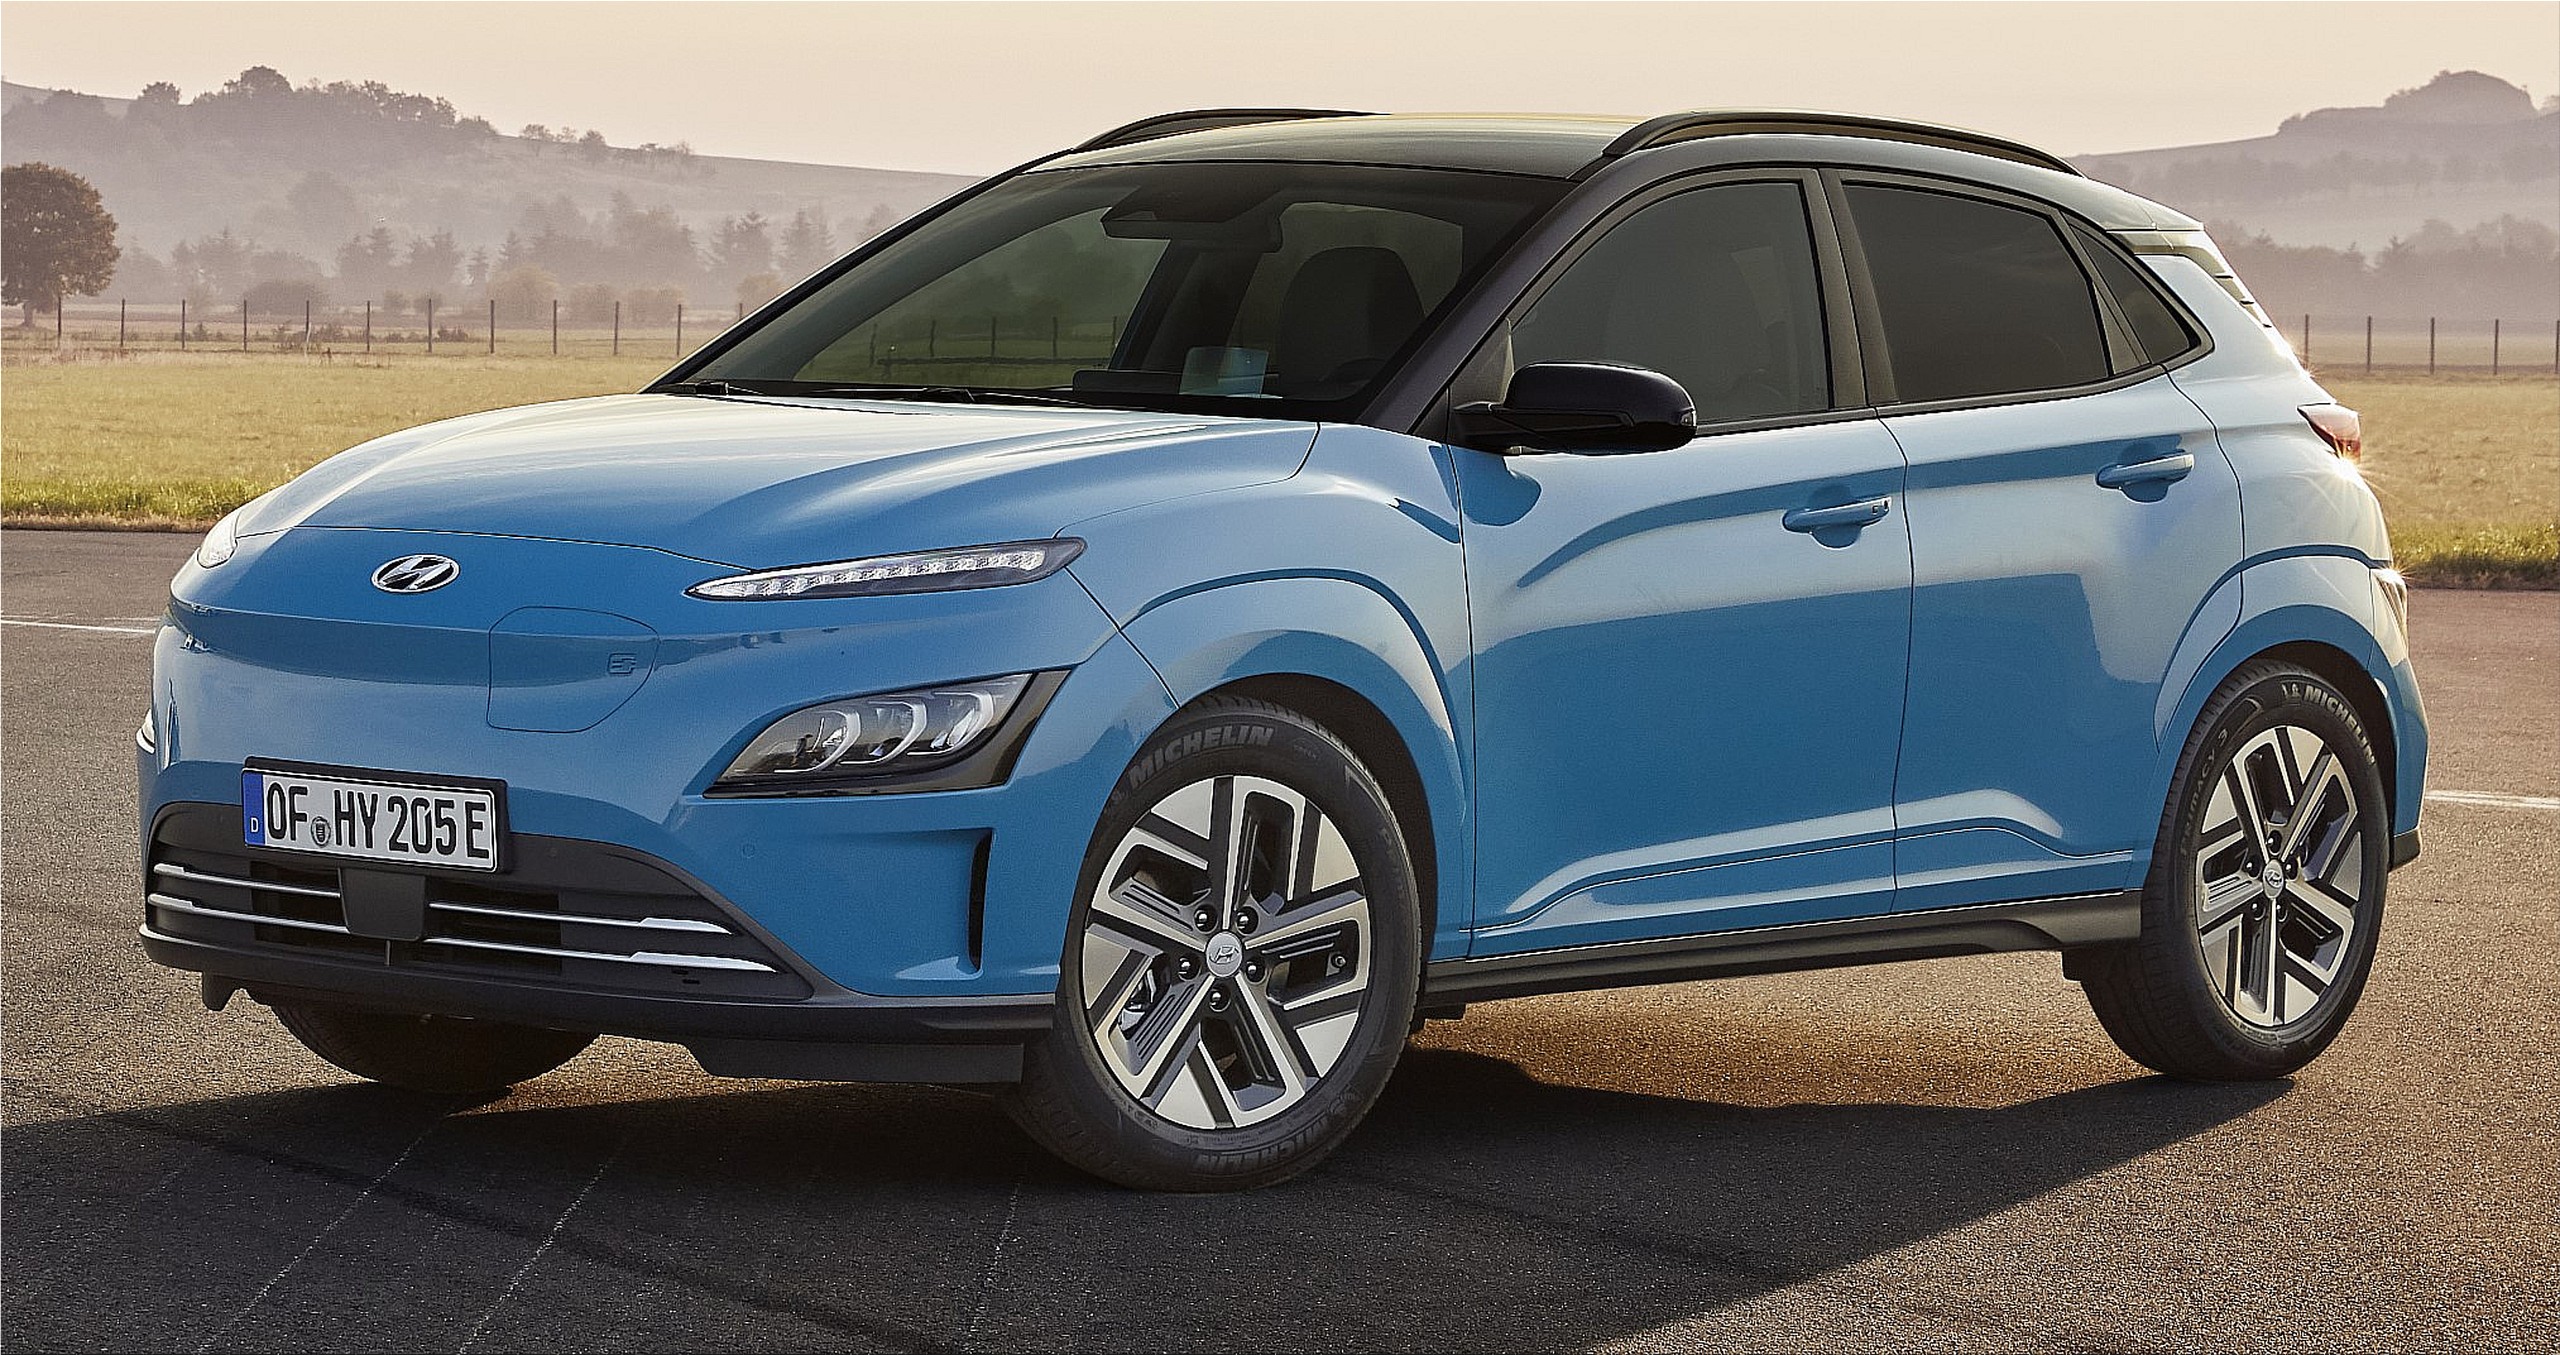 the-price-list-for-the-2021-hyundai-kona-electric-car-electric-hunter